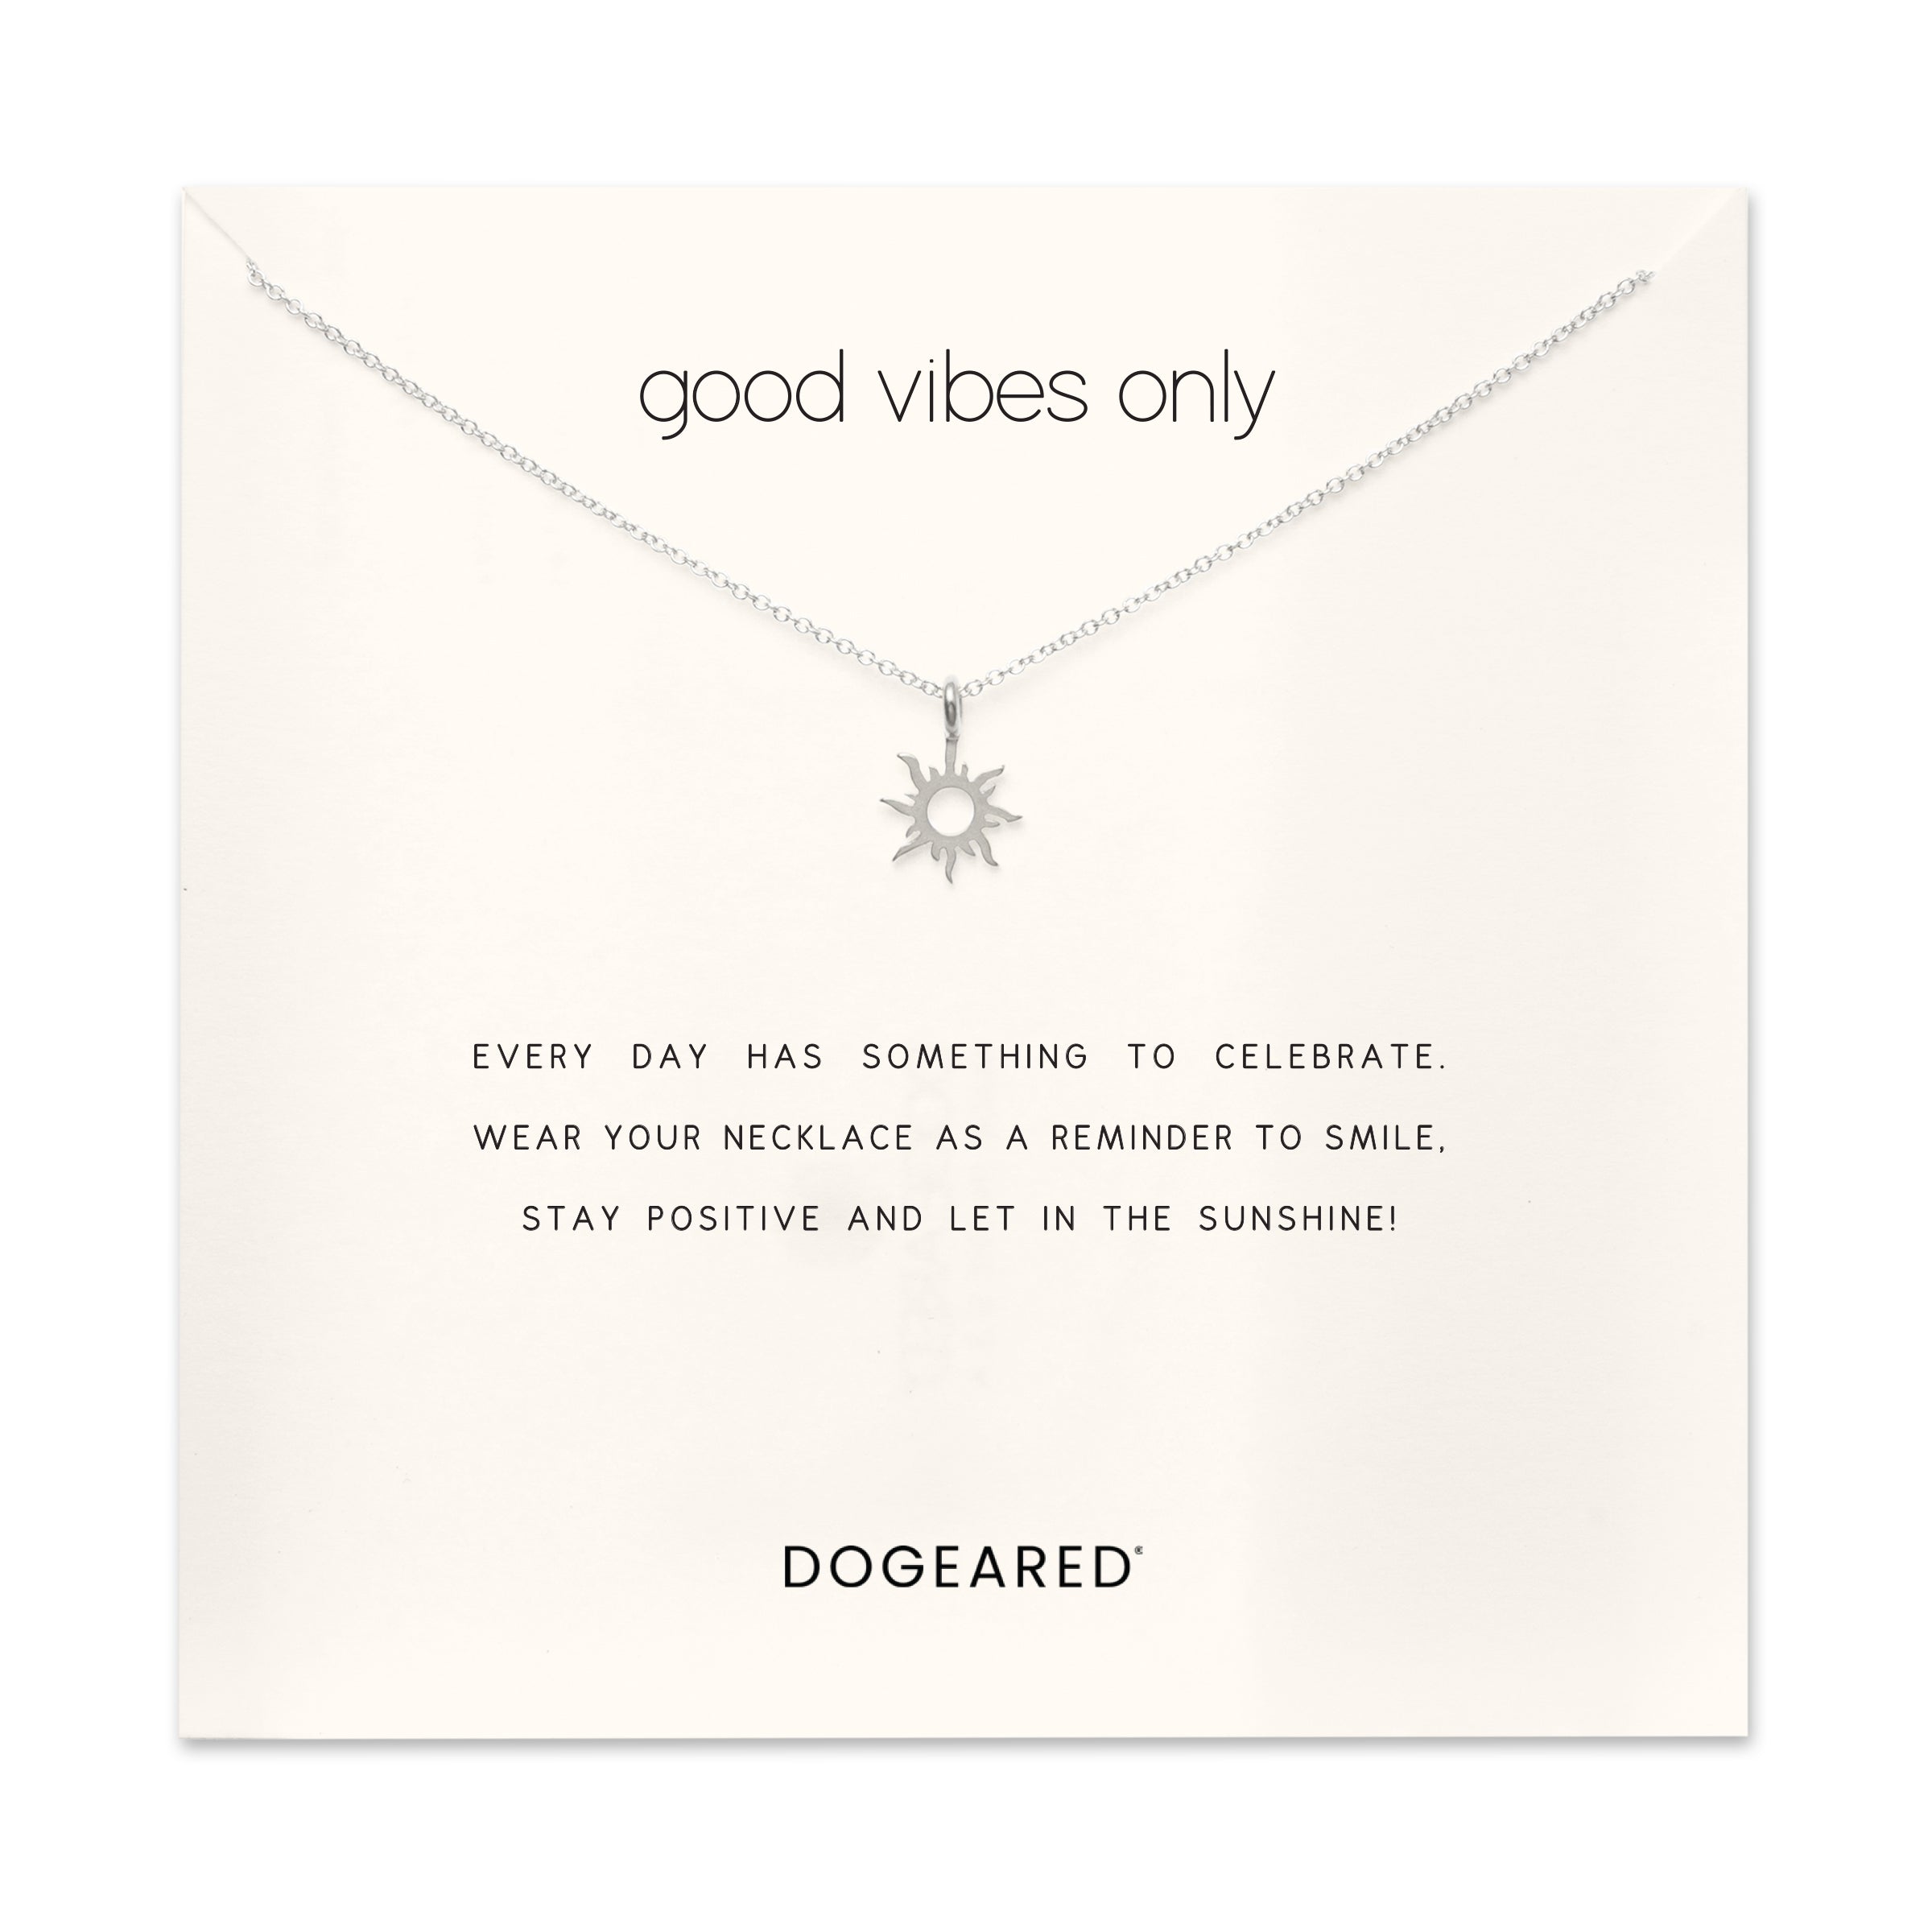 Good vibes only radiant sun necklace - Dogeared